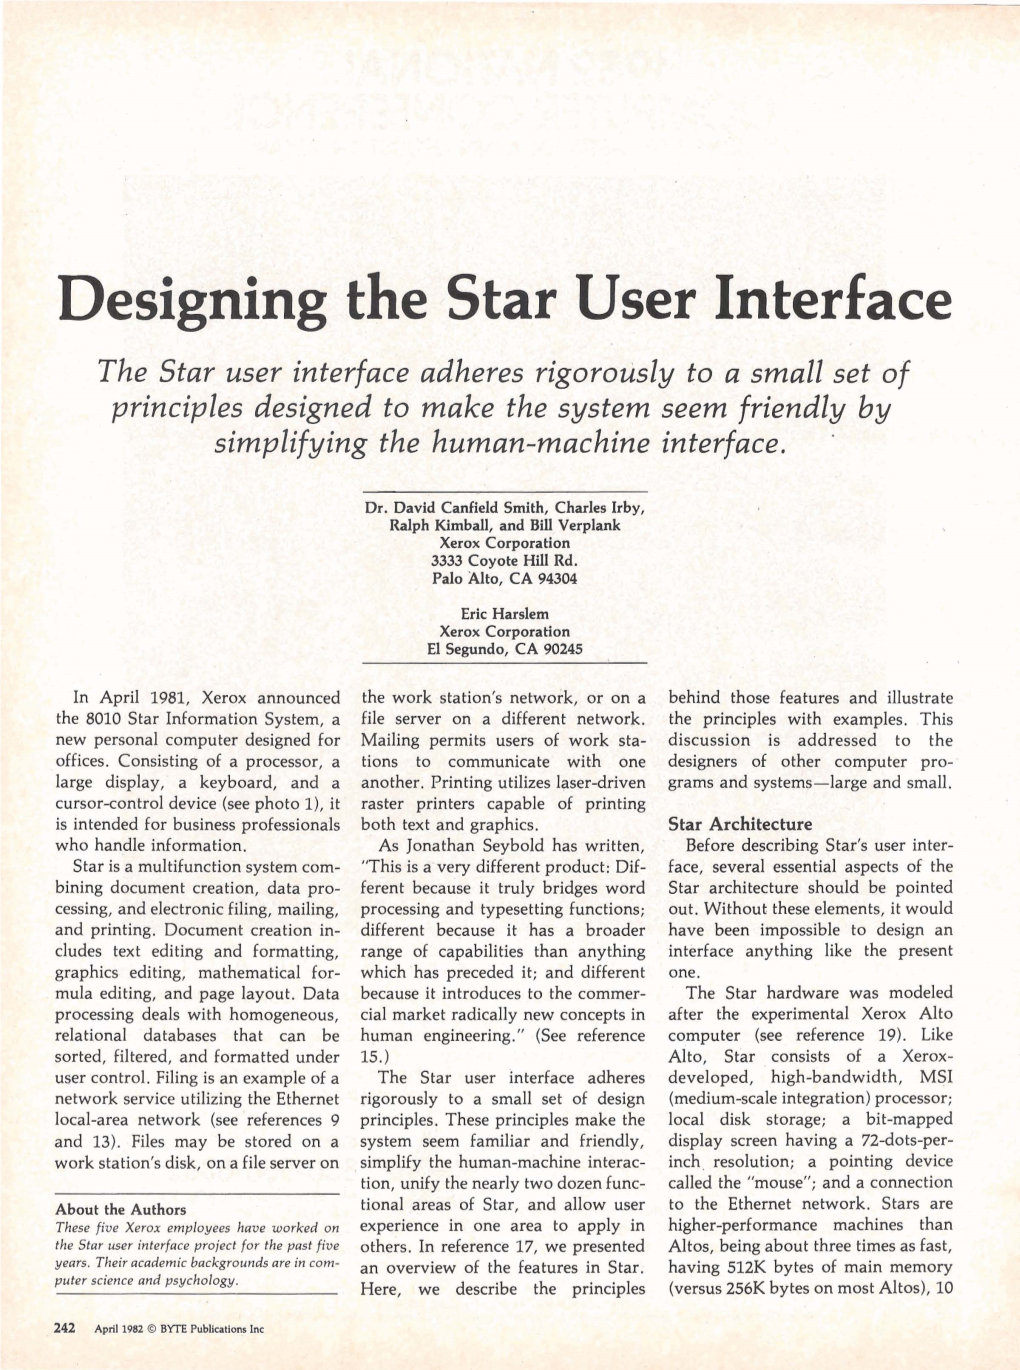 Designing the Star User Interface